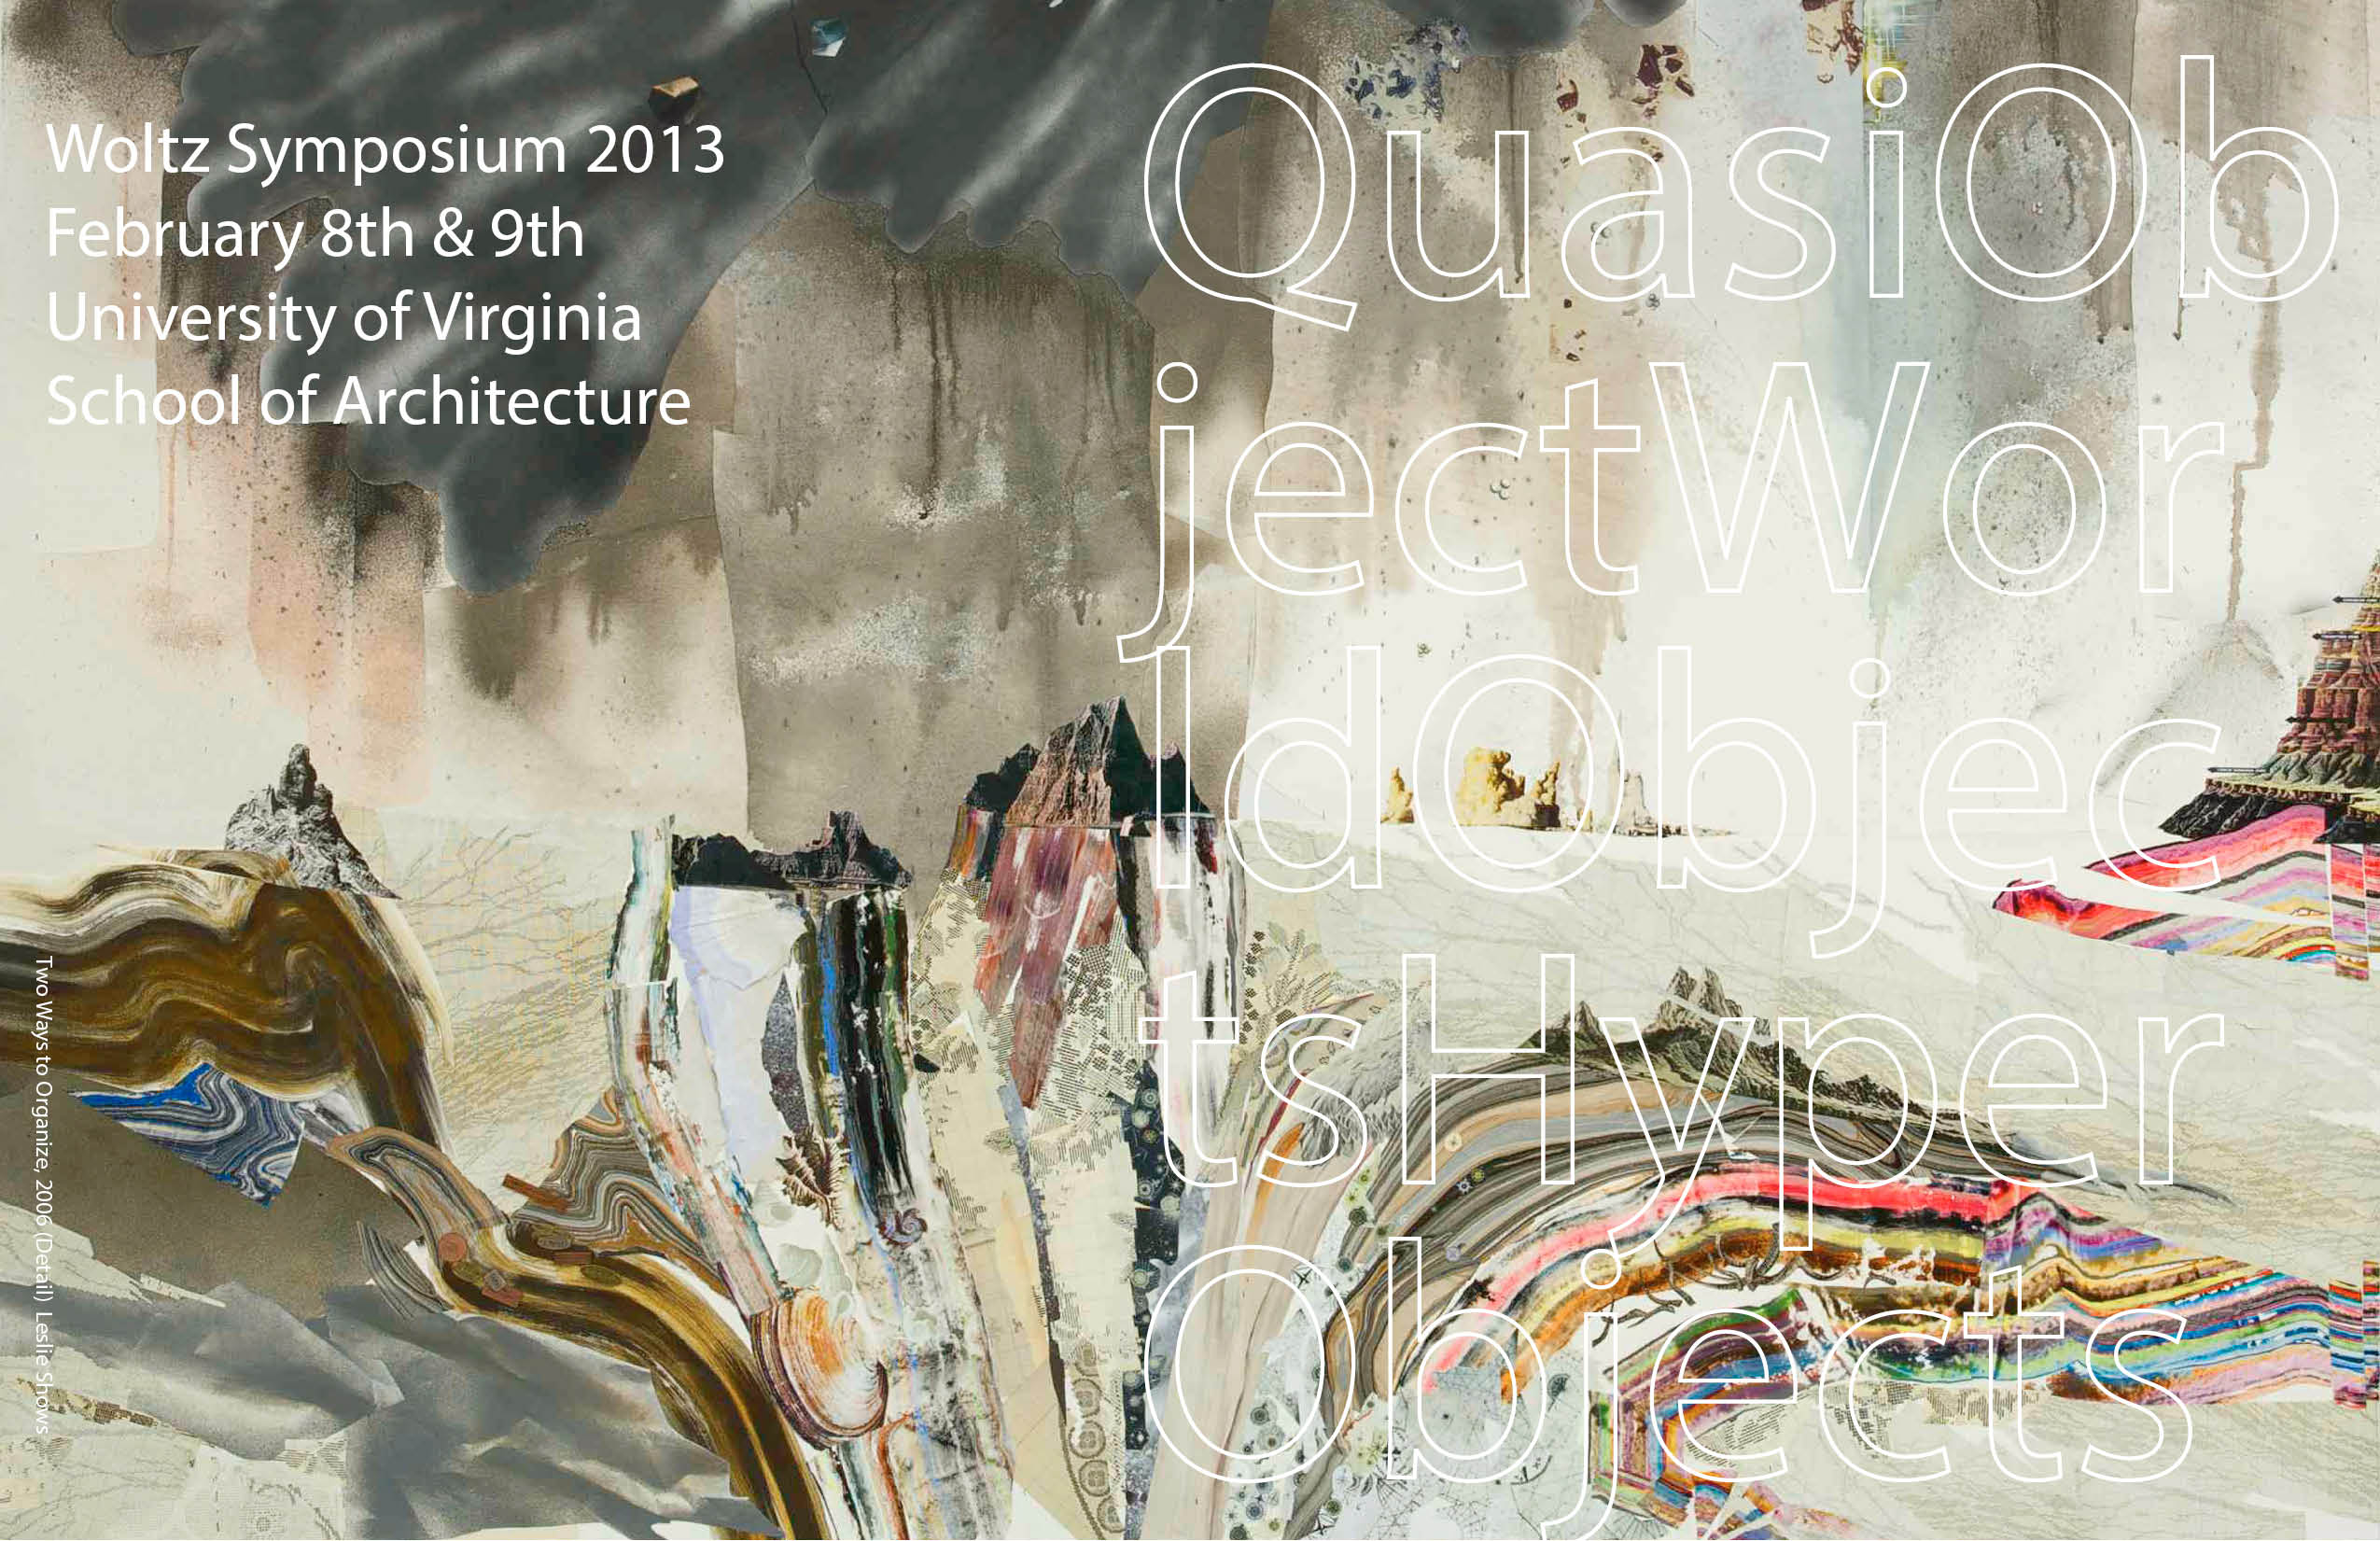 text reads: Woltz Symposium 2013, February 8th &9th, UVA School of Architecture